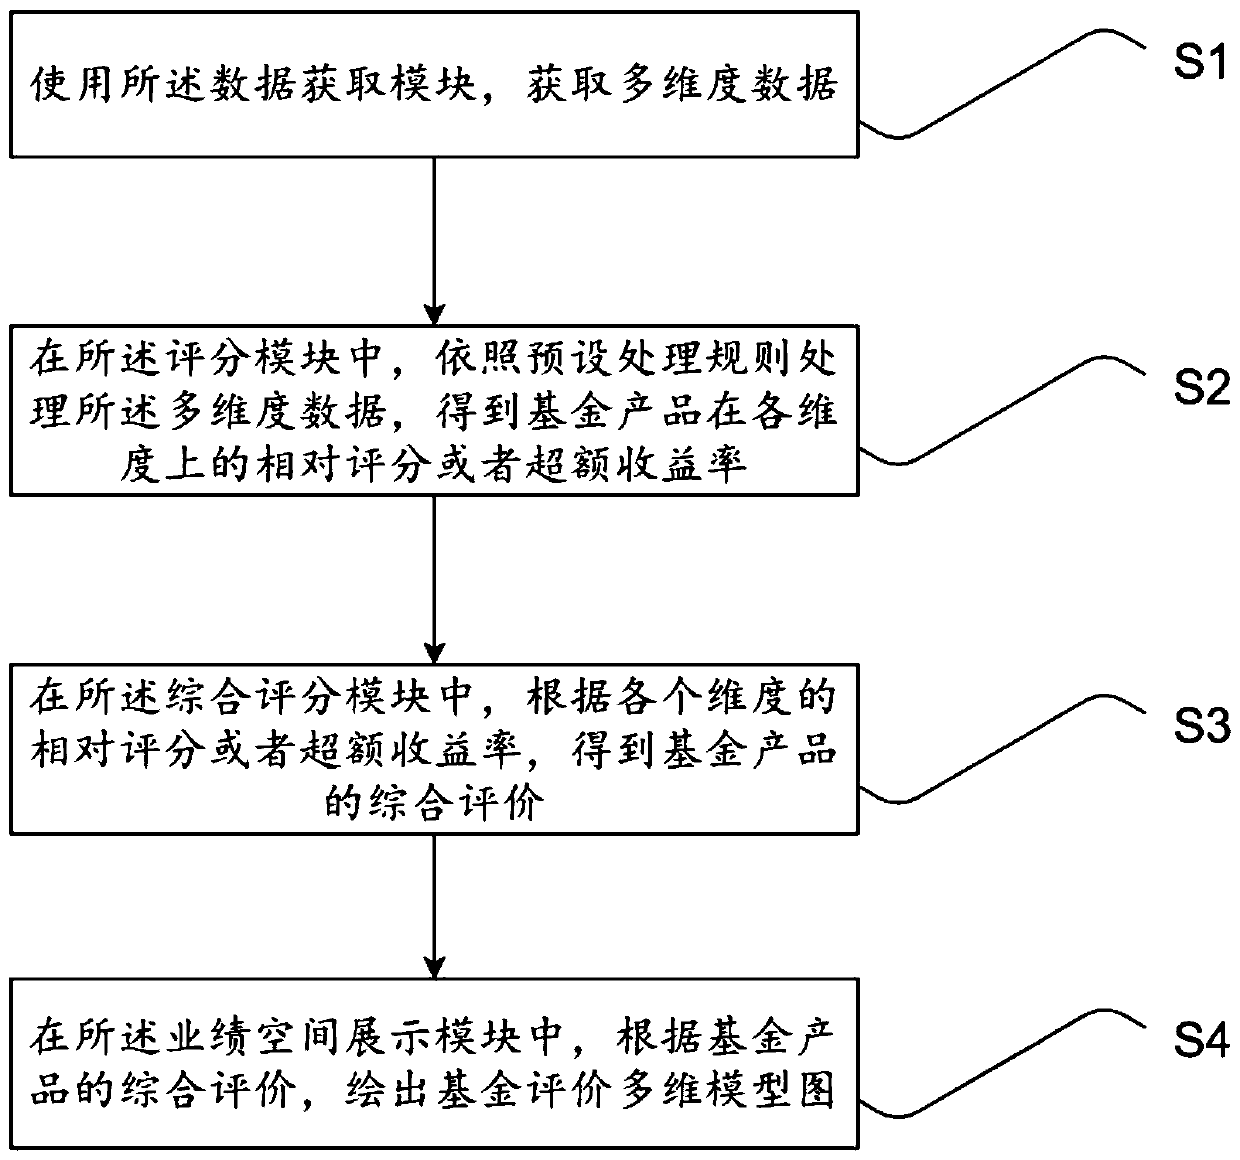 Multi-dimensional fund evaluation system and method